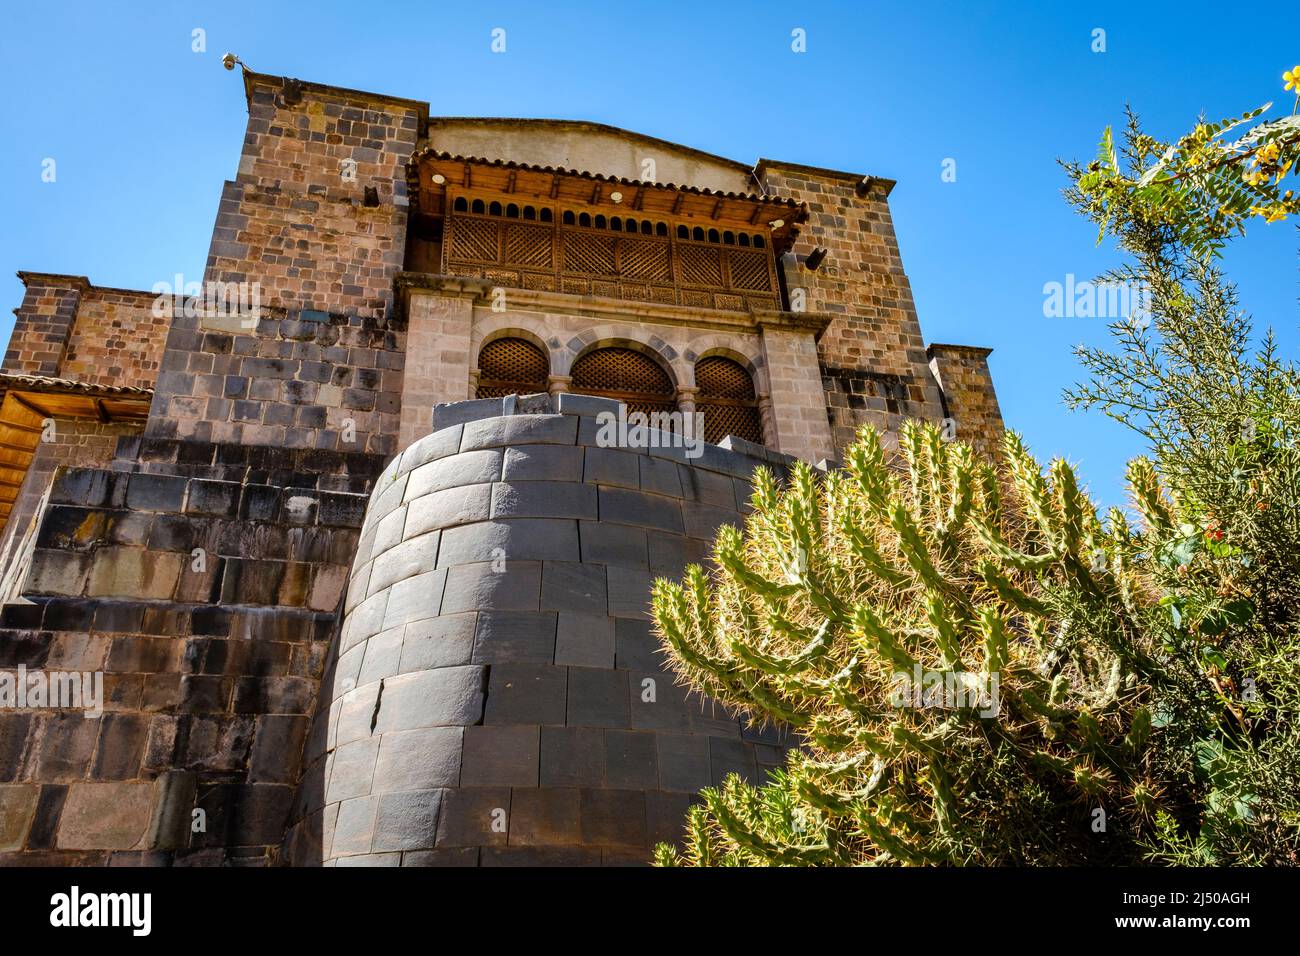 Convent of Santo Domingo and church built on top of Coricancha Temple Incan ancient city ruins in Cusco, Sacred Valley, Peru Stock Photo